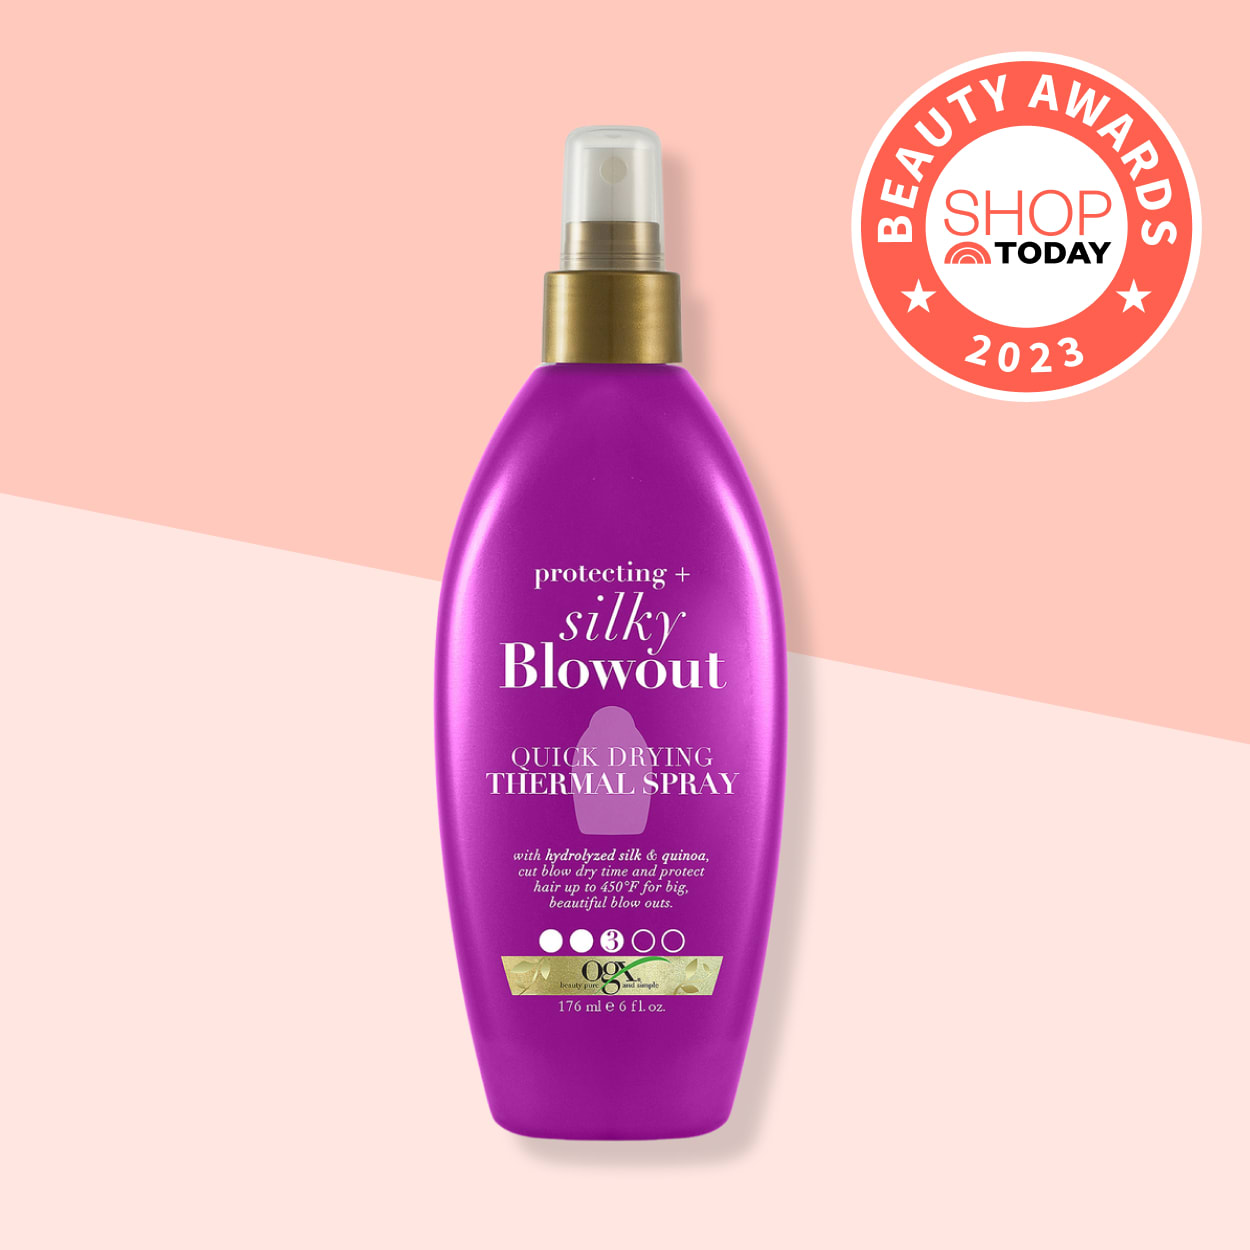 31 products Shop Beauty 2023: of best hair TODAY Awards